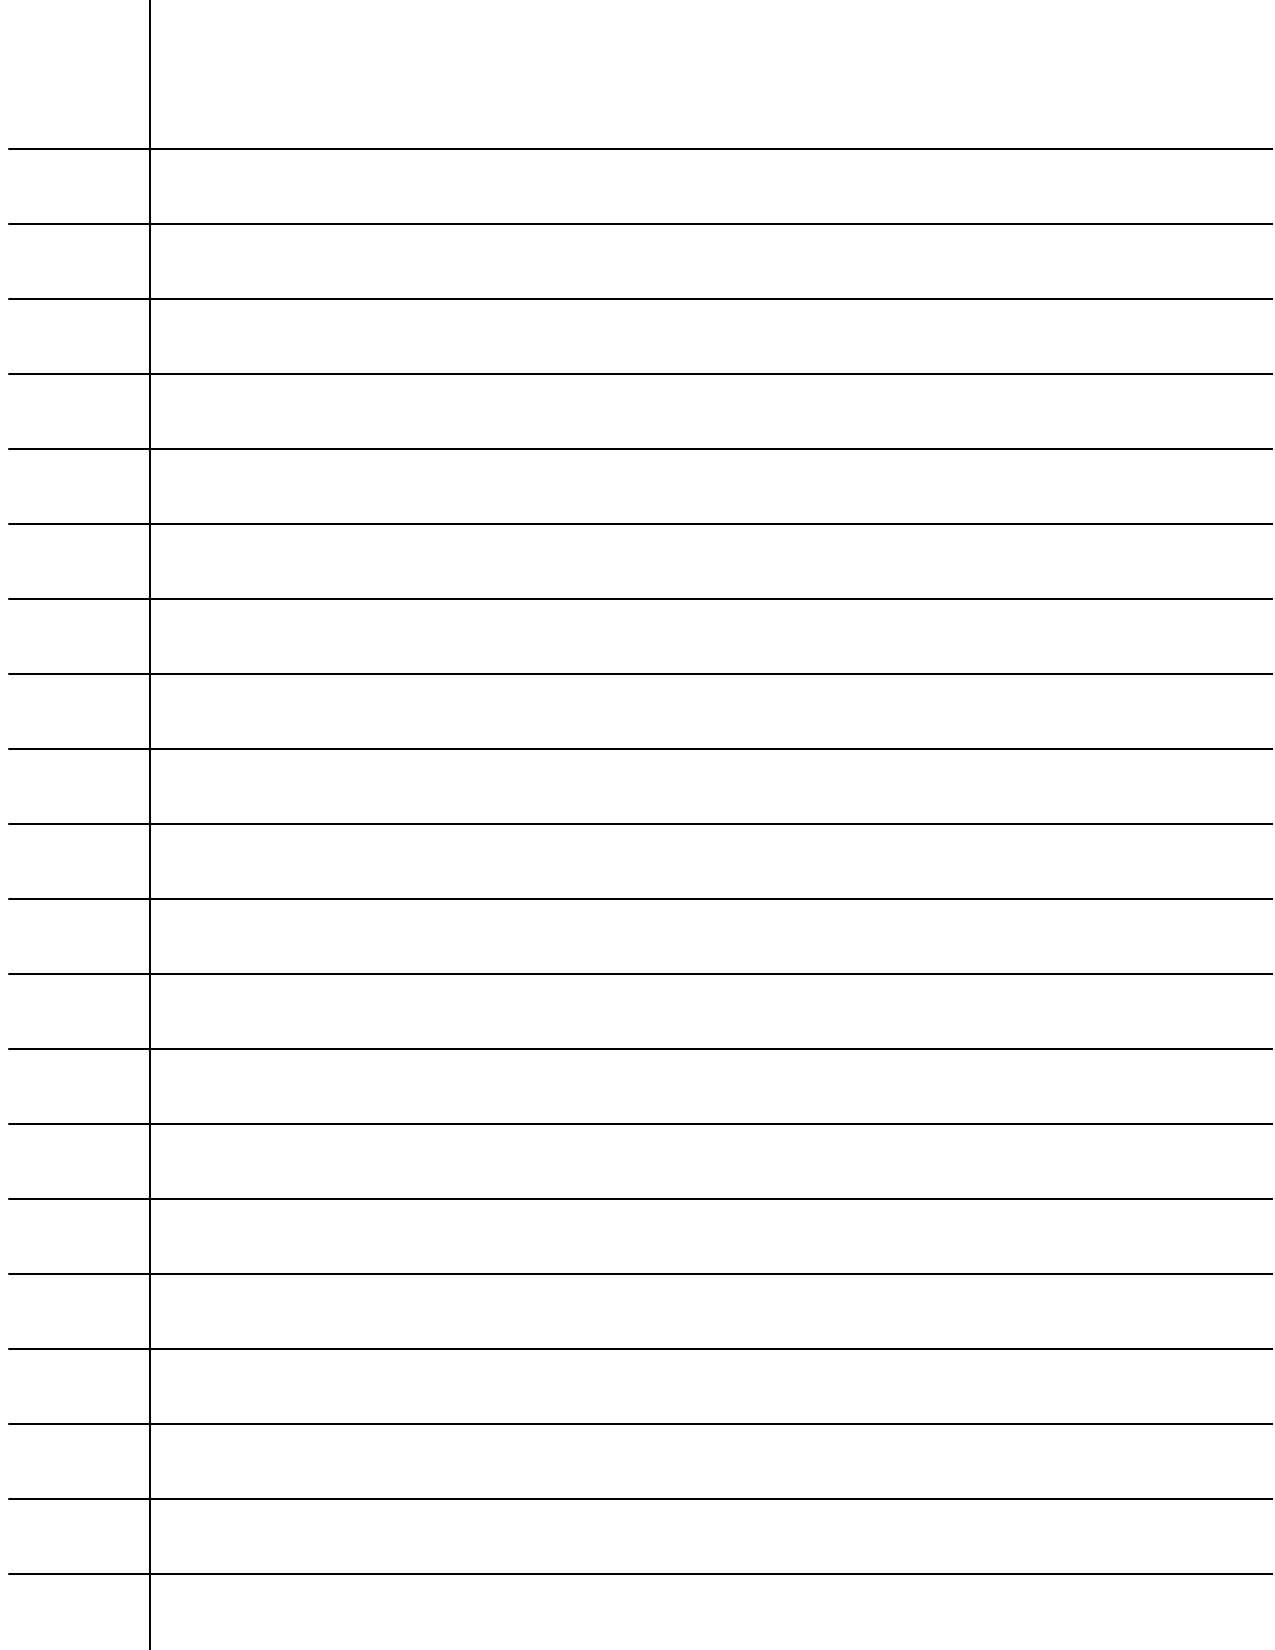 Ruled Paper Word Template – Atlantaauctionco Inside Ruled Paper Word Template